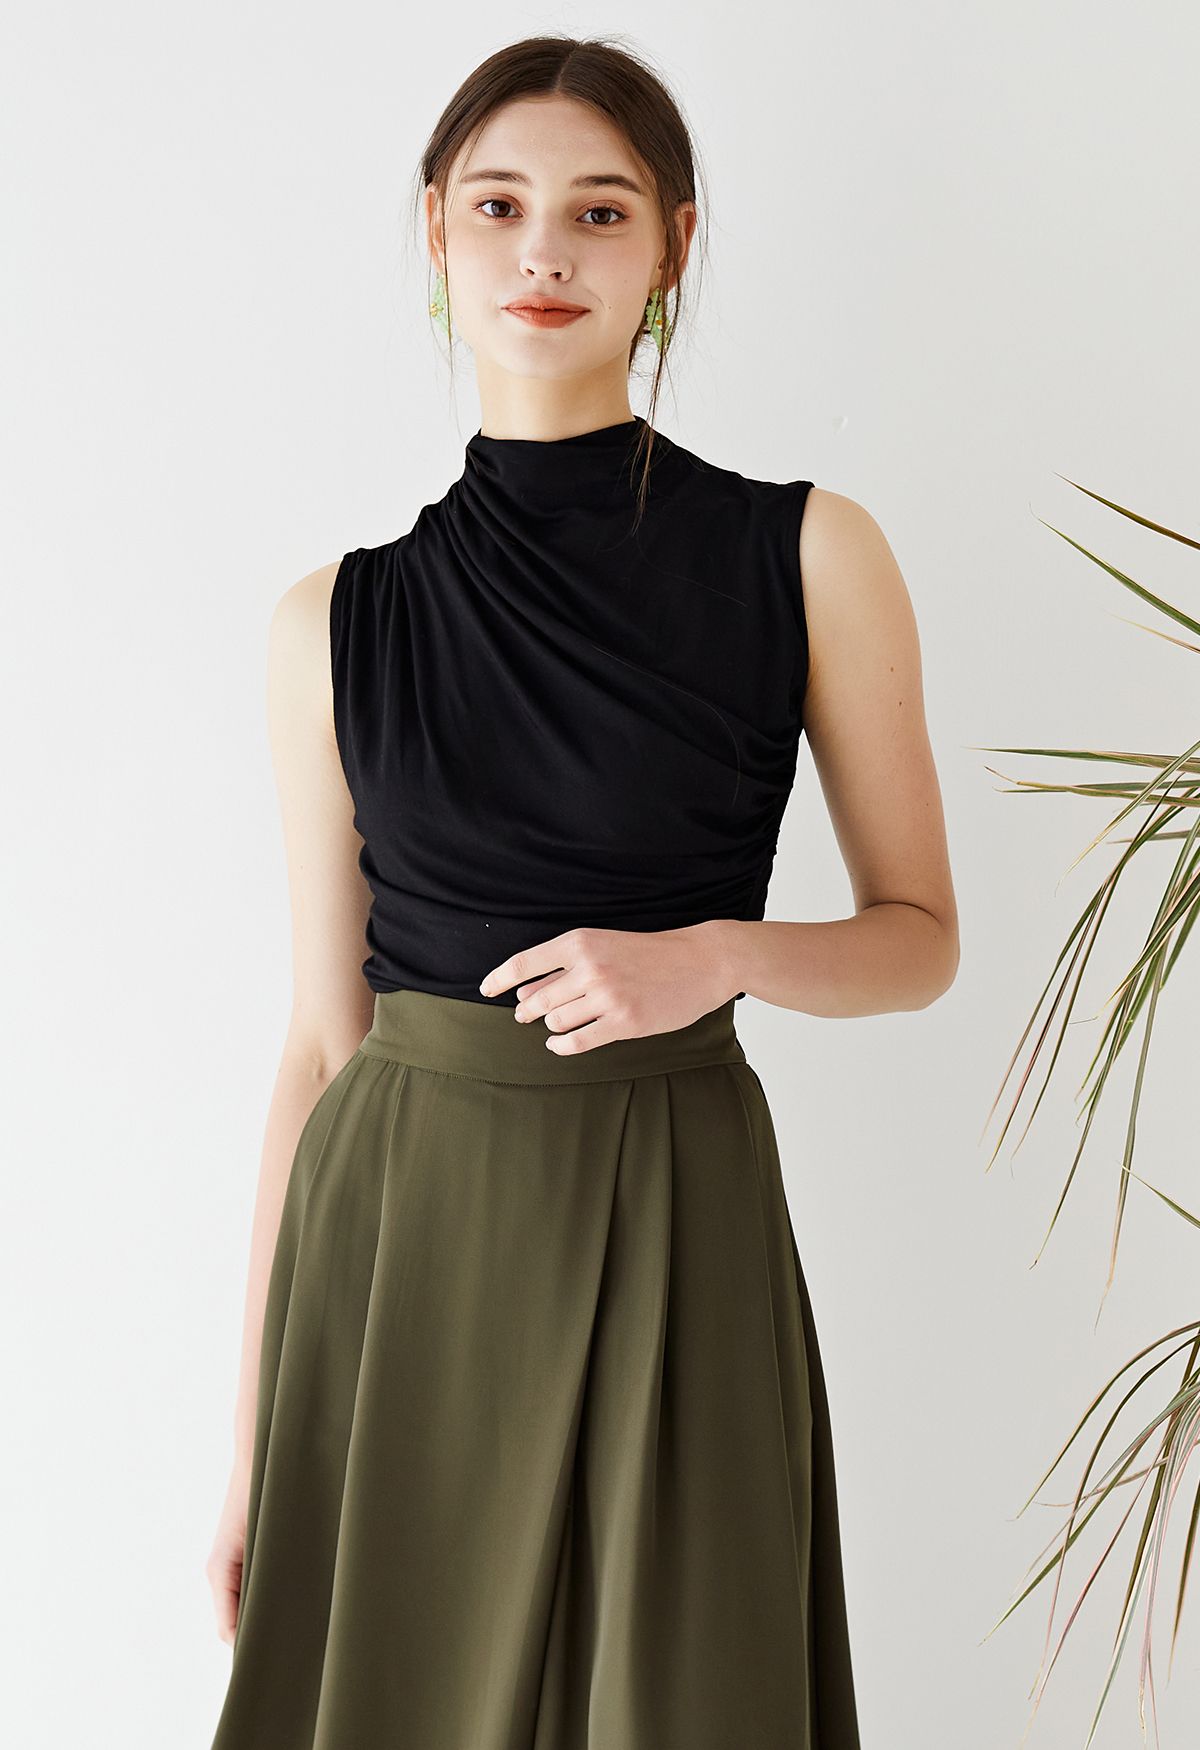 Ruched Detail Sleeveless Top in Black